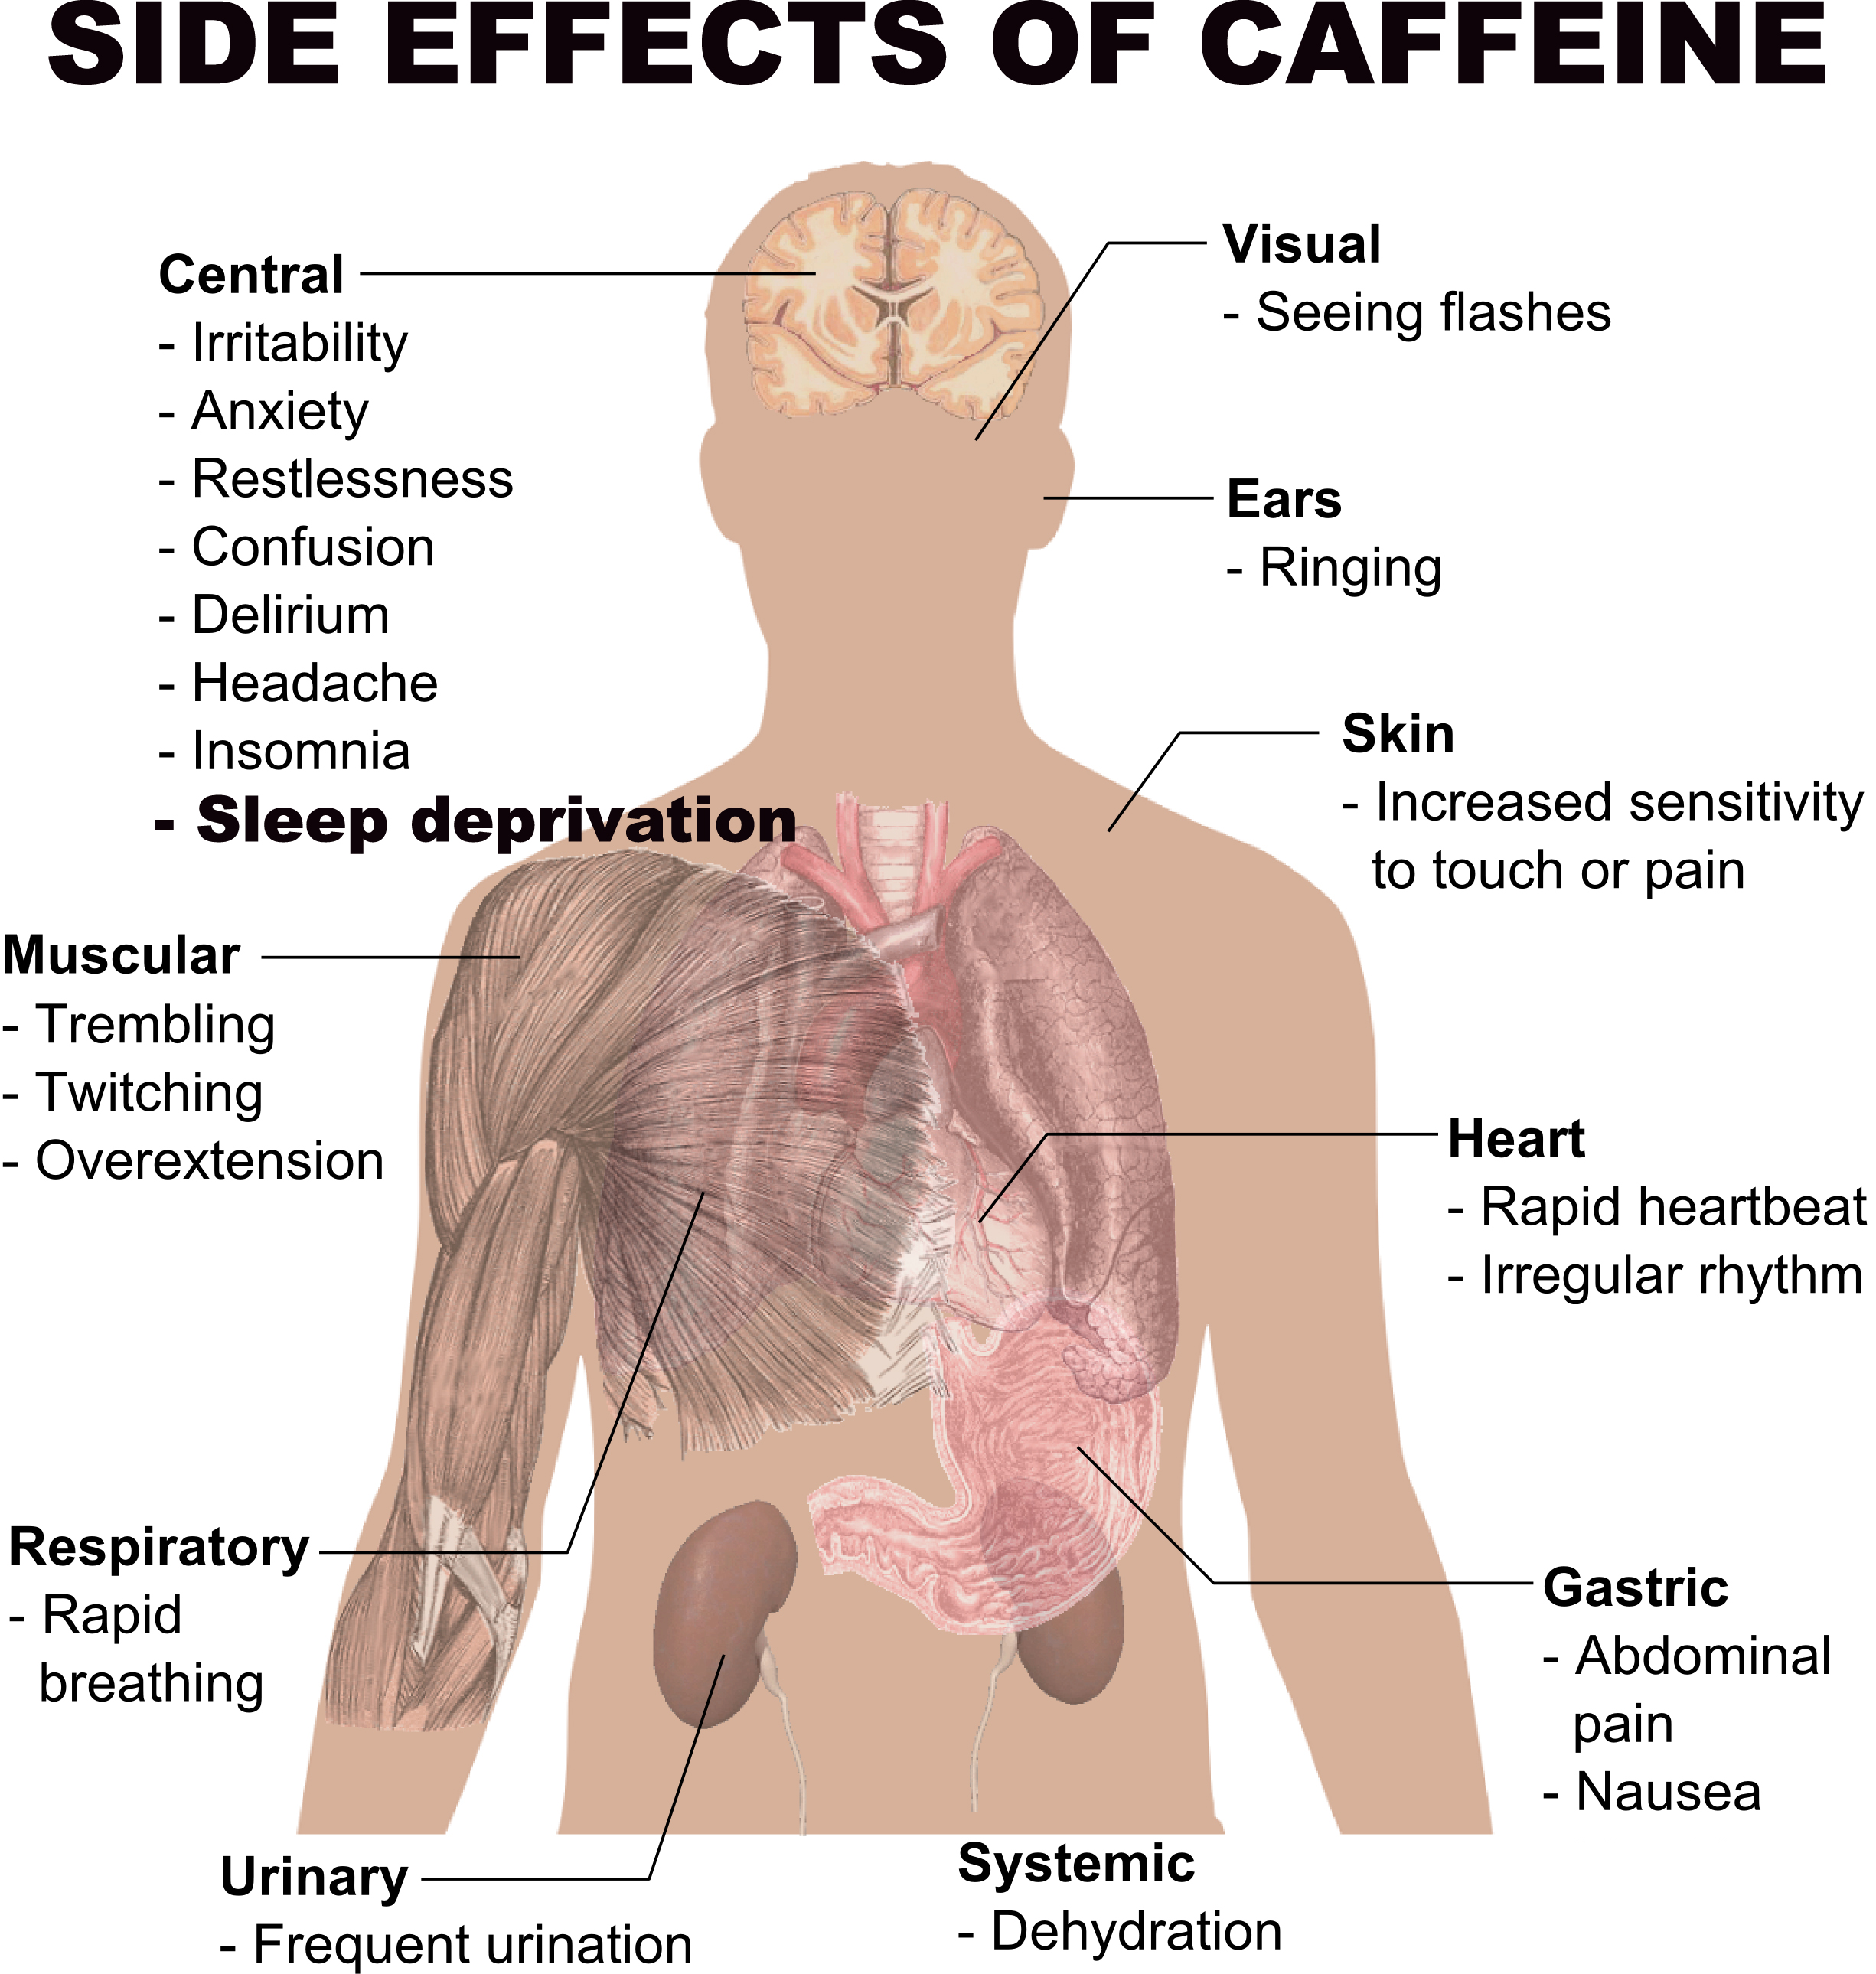 How Long Does it Take for Caffeine to Wear Off?